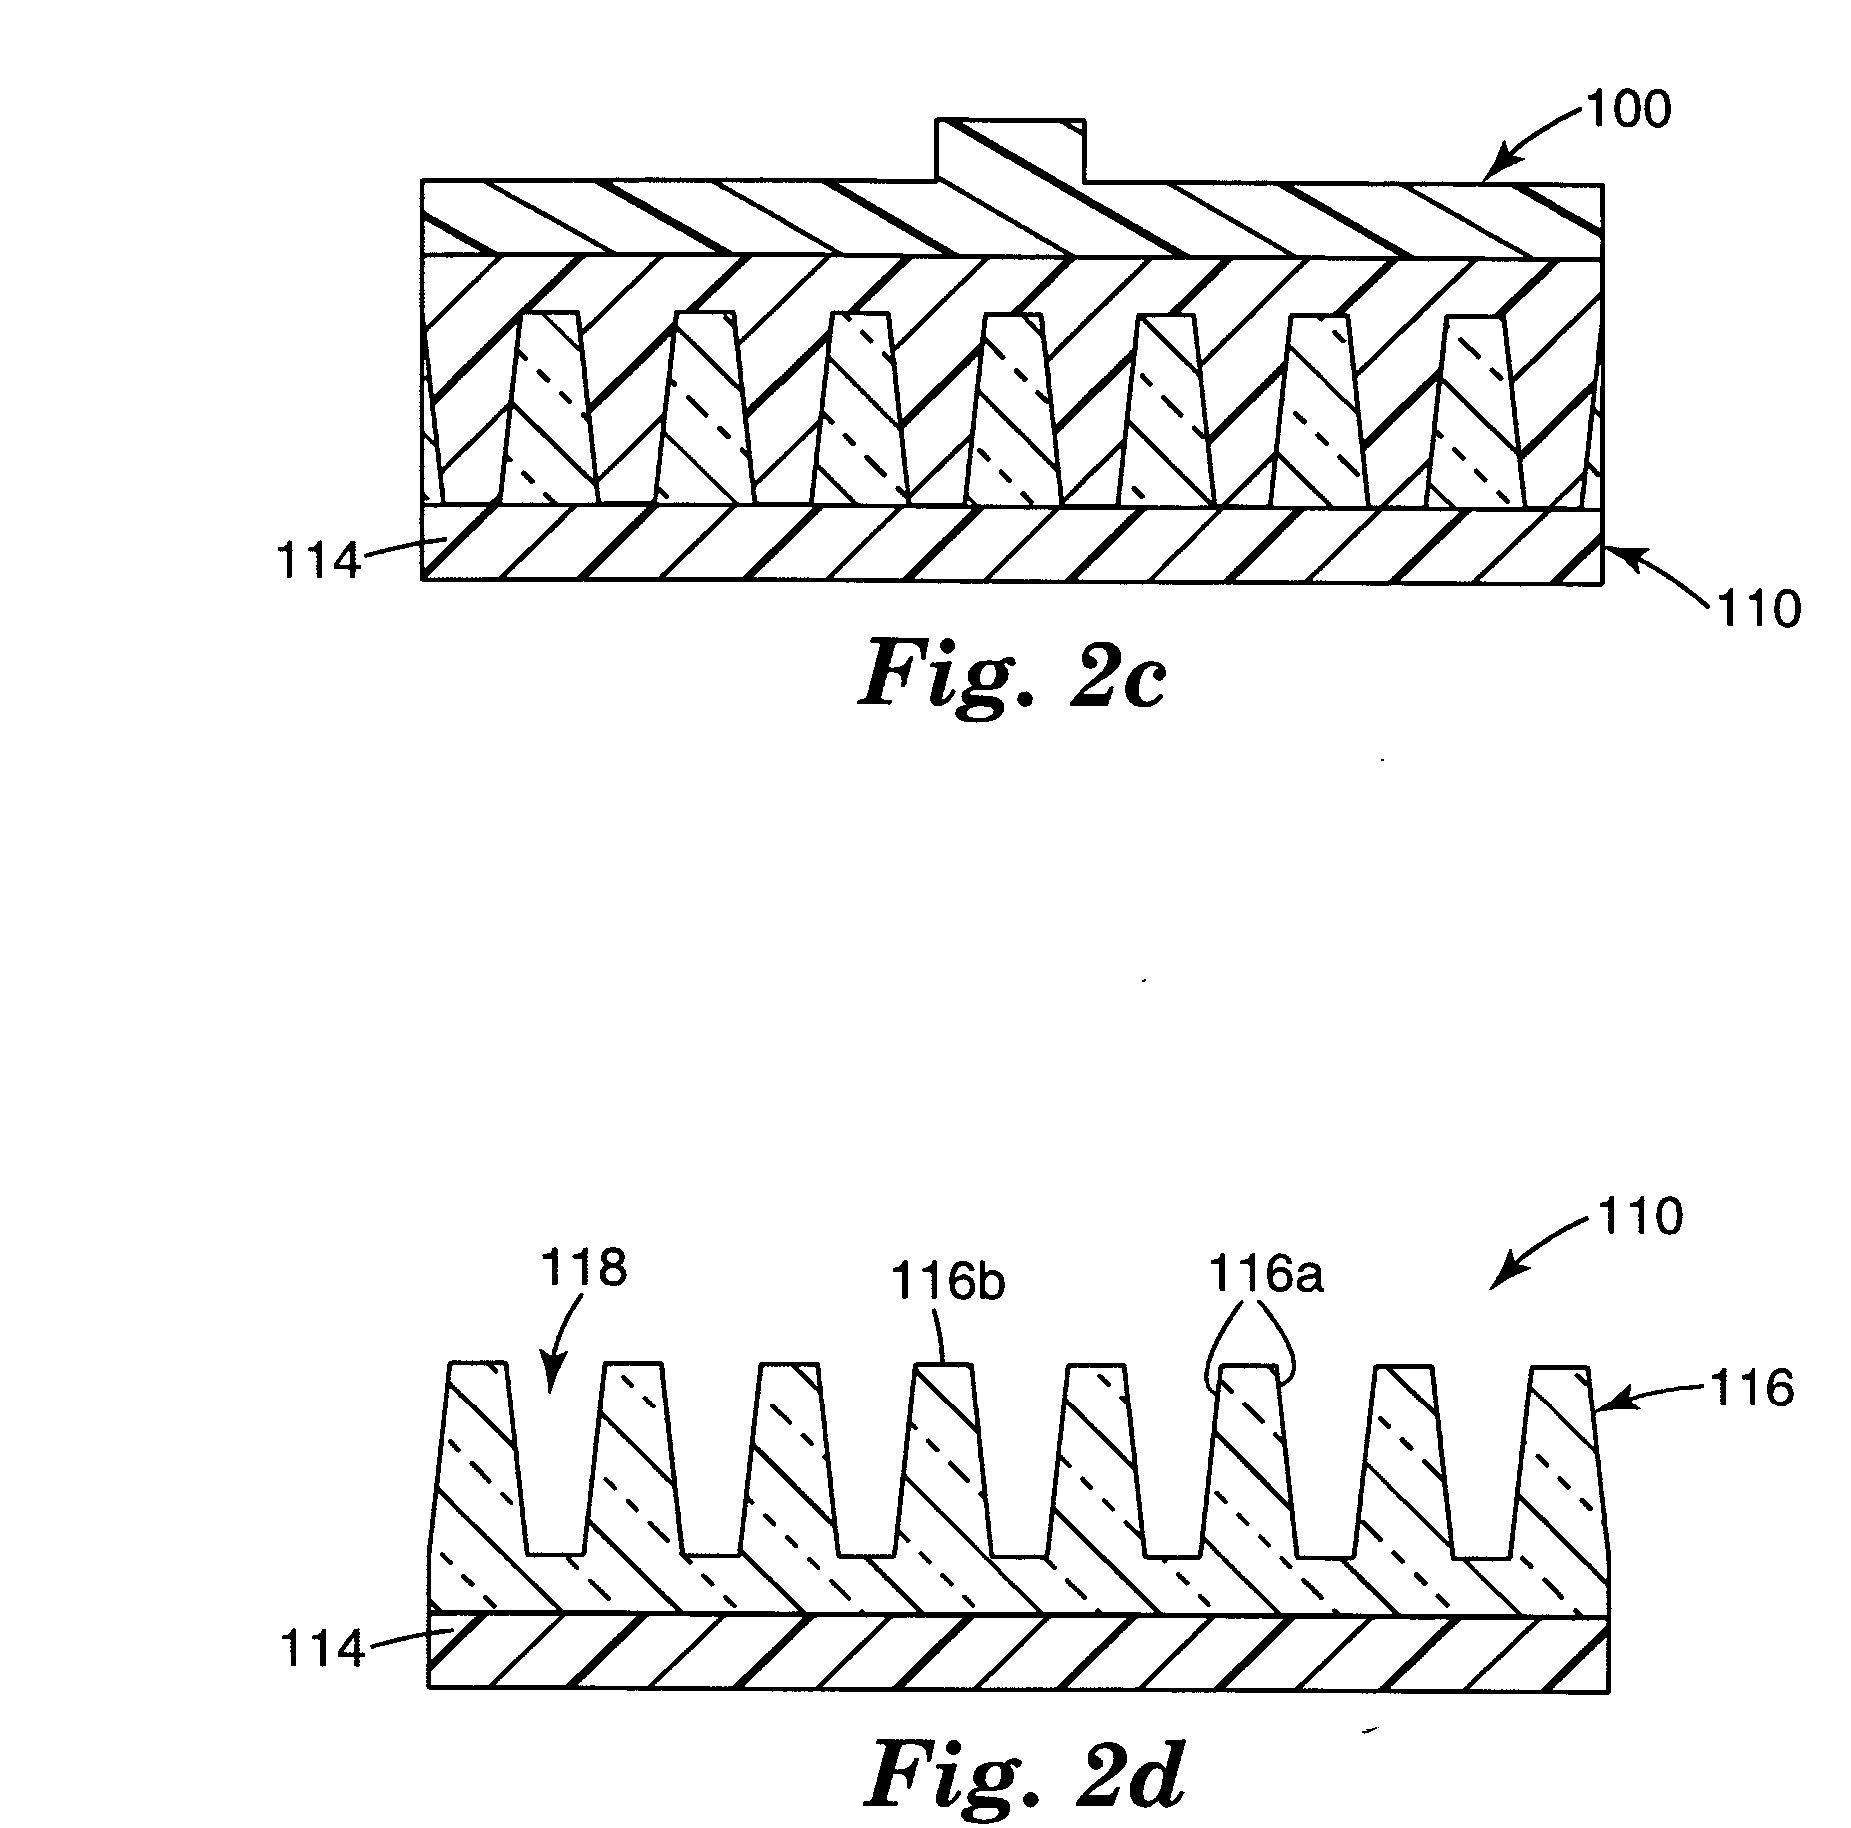 Process for manufacturing a light emitting array